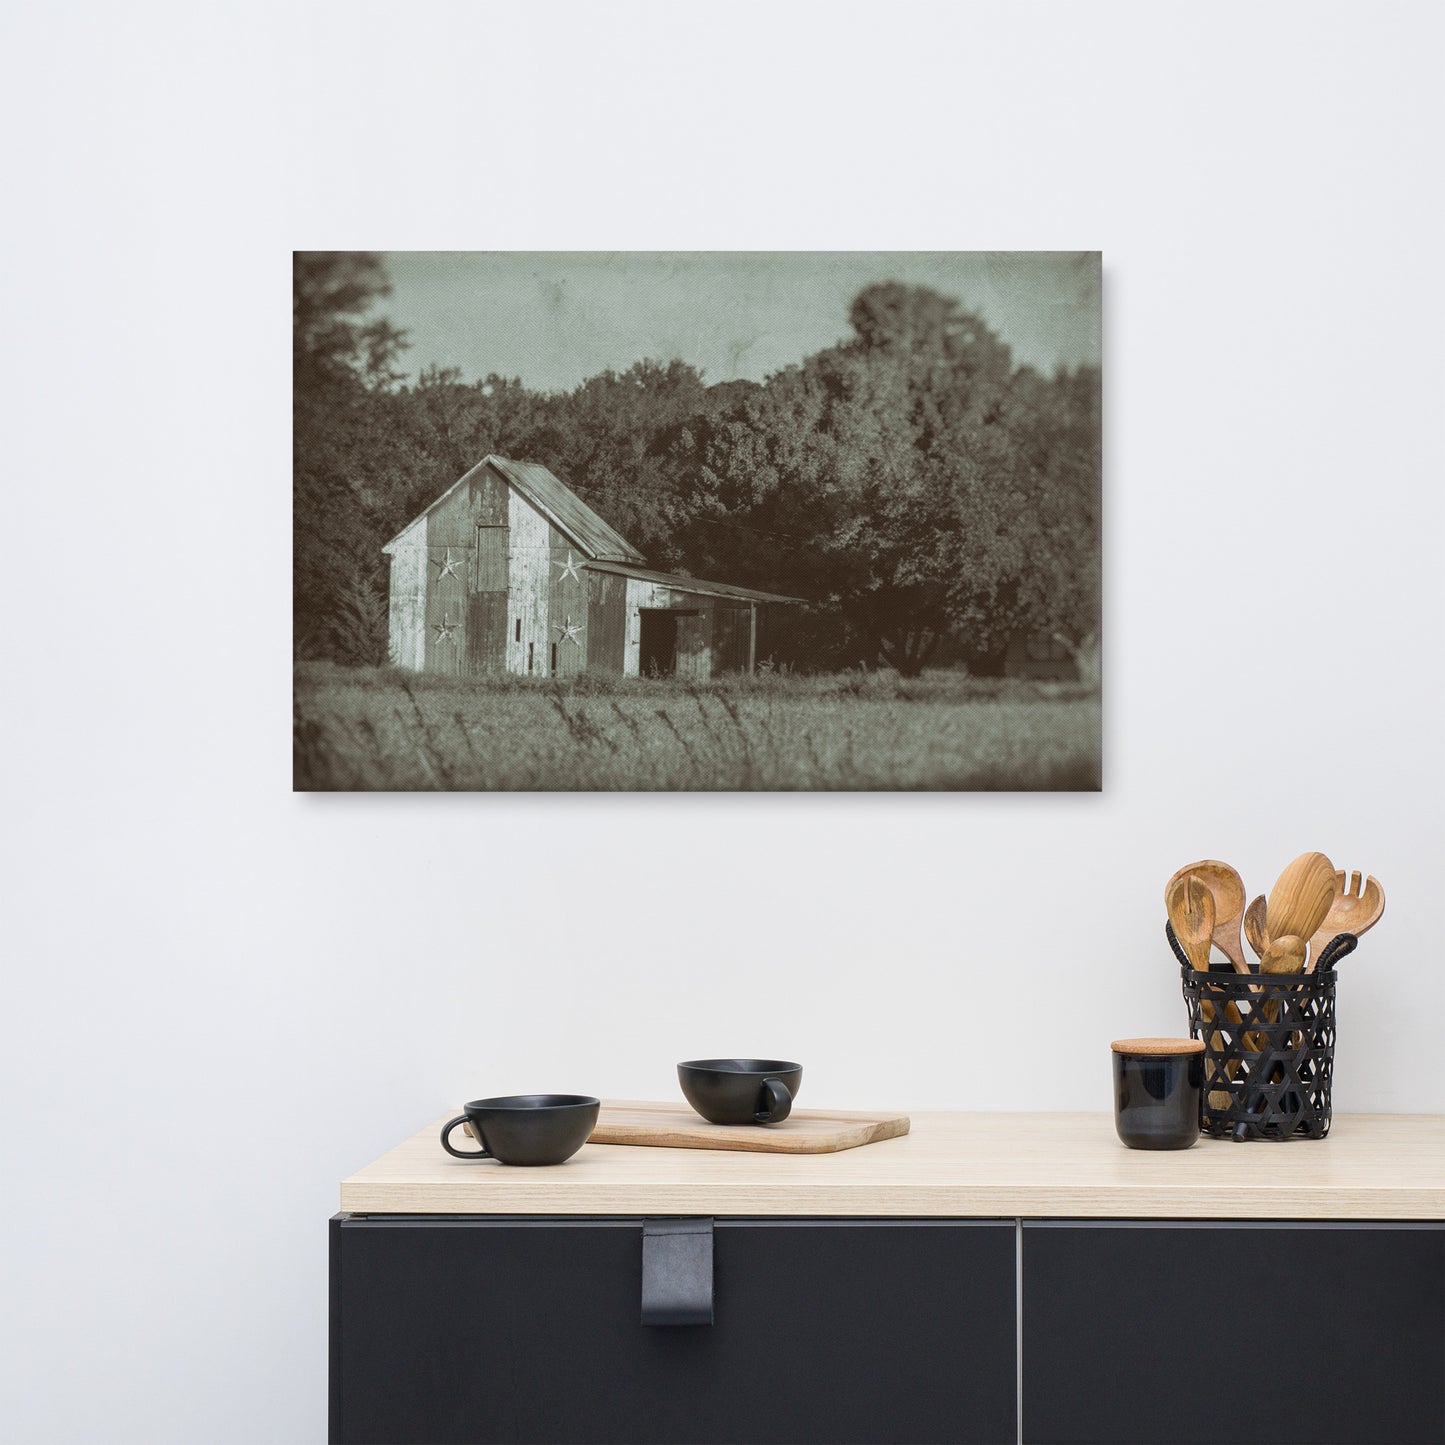 Patriotic Barn in Field Vintage Black and White Rural Landscape Canvas Wall Art Prints